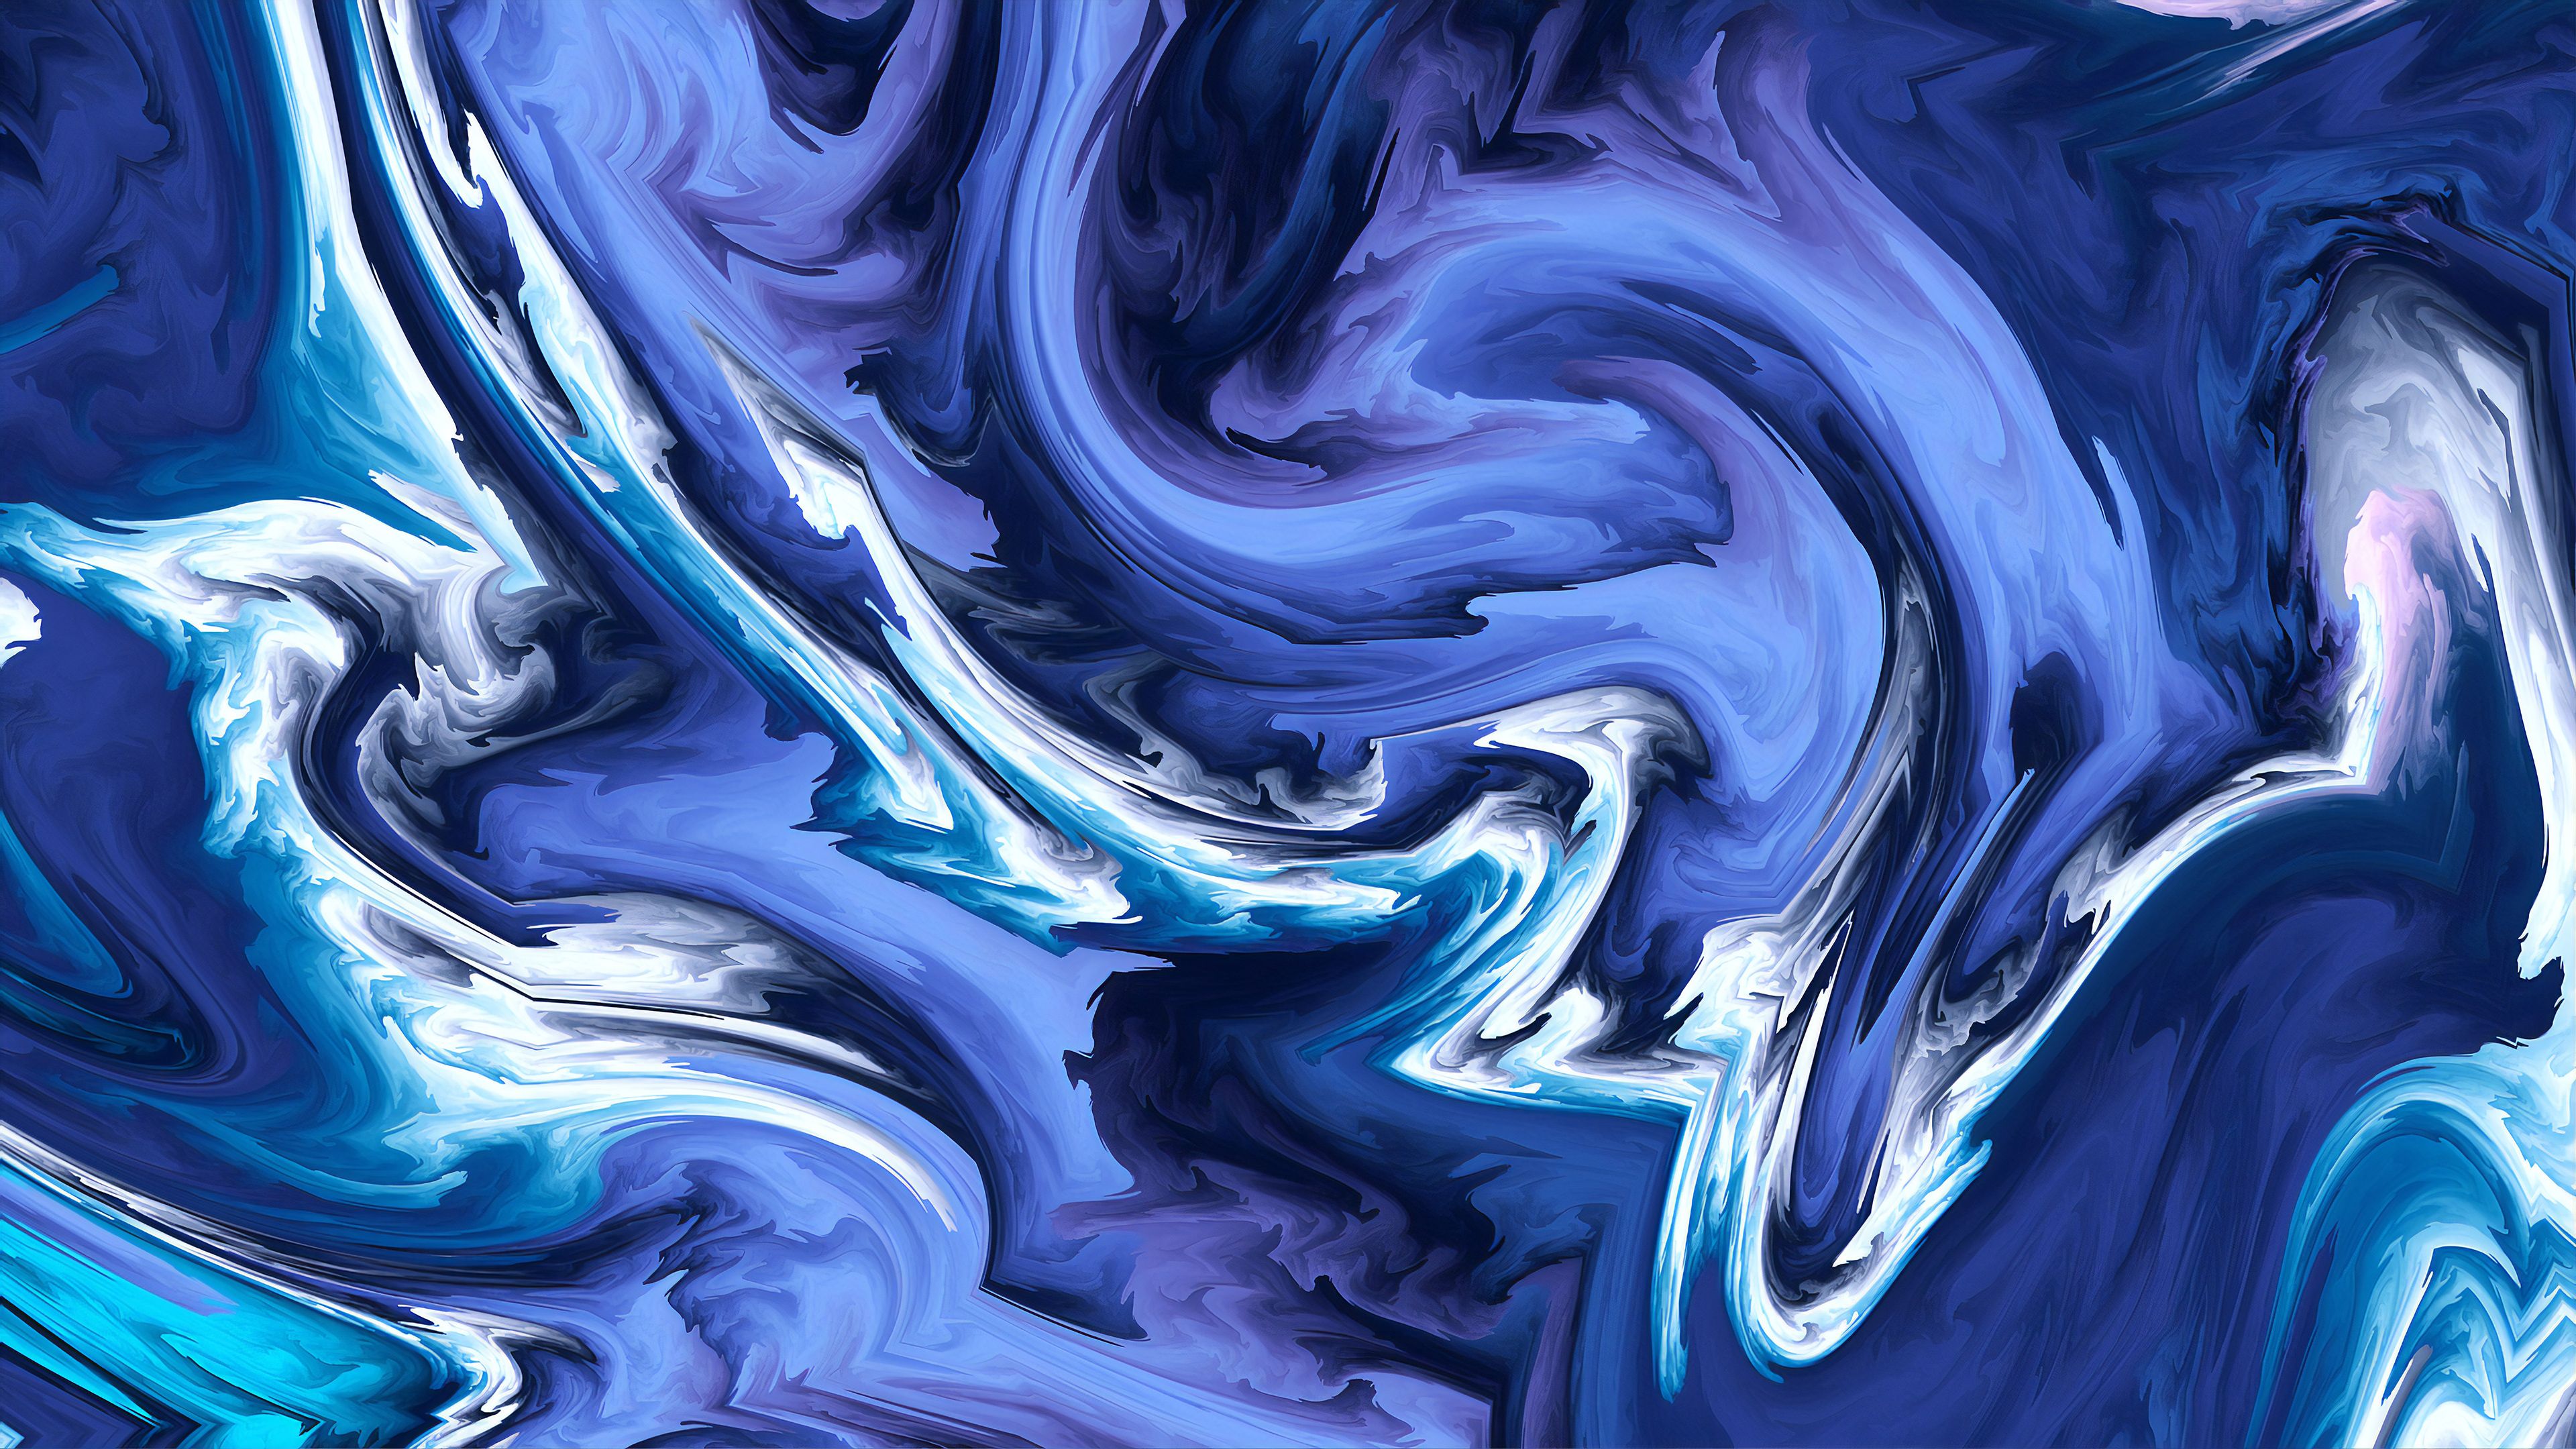 Blue Agate 4k, HD Abstract, 4k Wallpaper, Image, Background